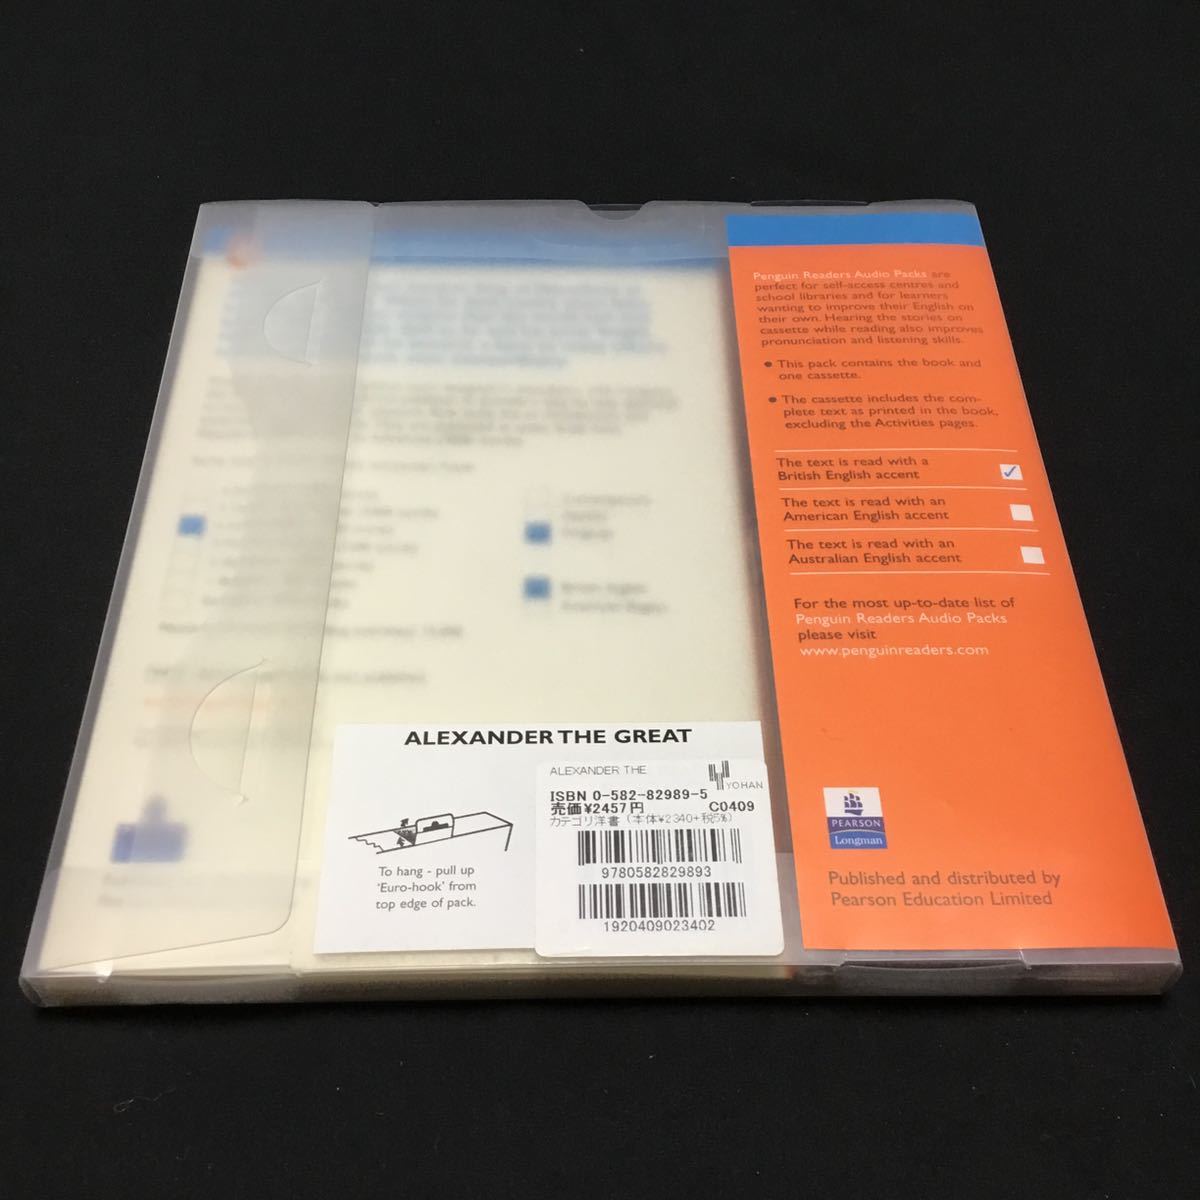 Fiona Beddall Alexander the Great Book and Cassette Pack (Penguin Readers (Graded Readers)) マケドニア帝国 洋書 カセットテープ_画像4